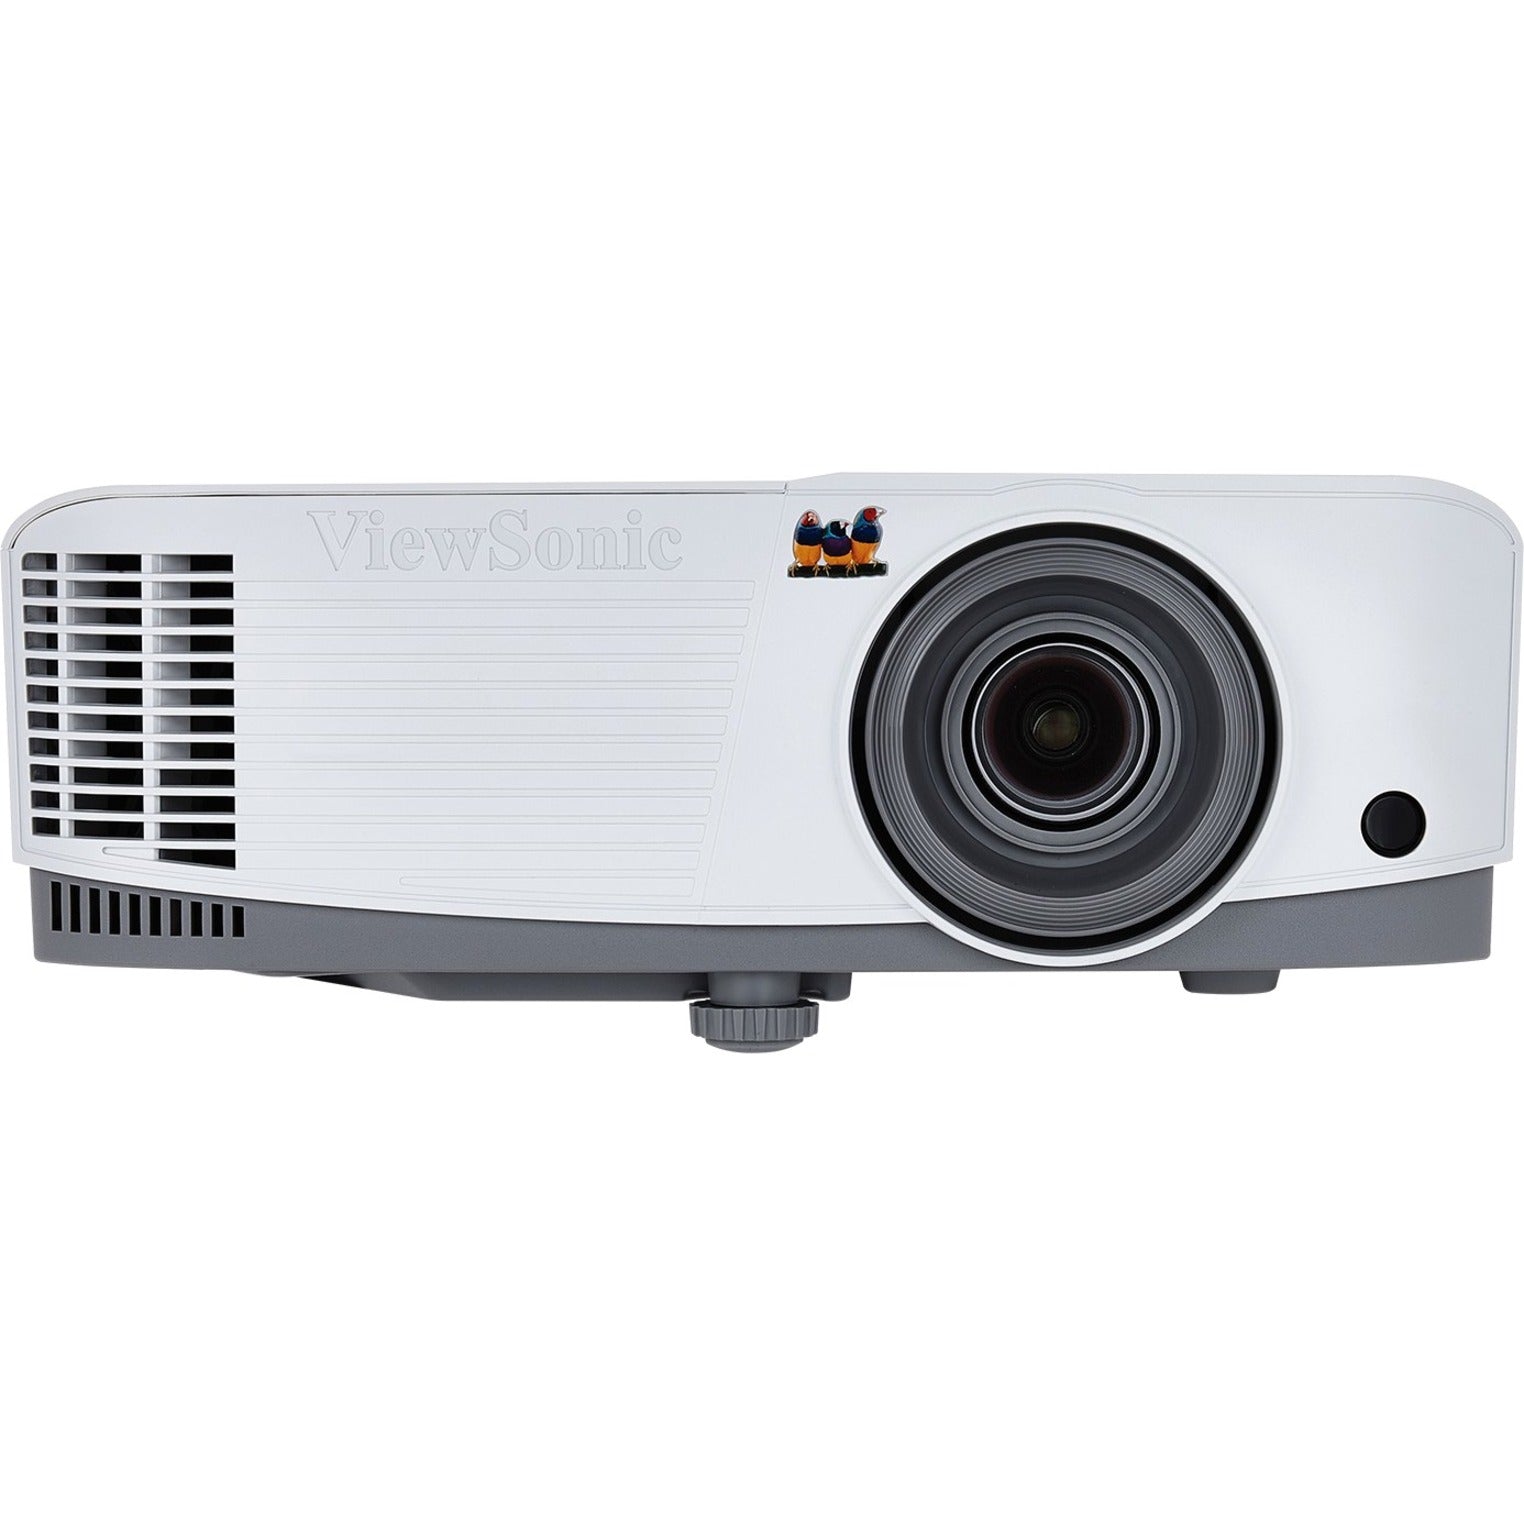 ViewSonic PA503S SVGA DLP Projector with SuperColor, 3600lm - High-Quality Home Theater and Presentations